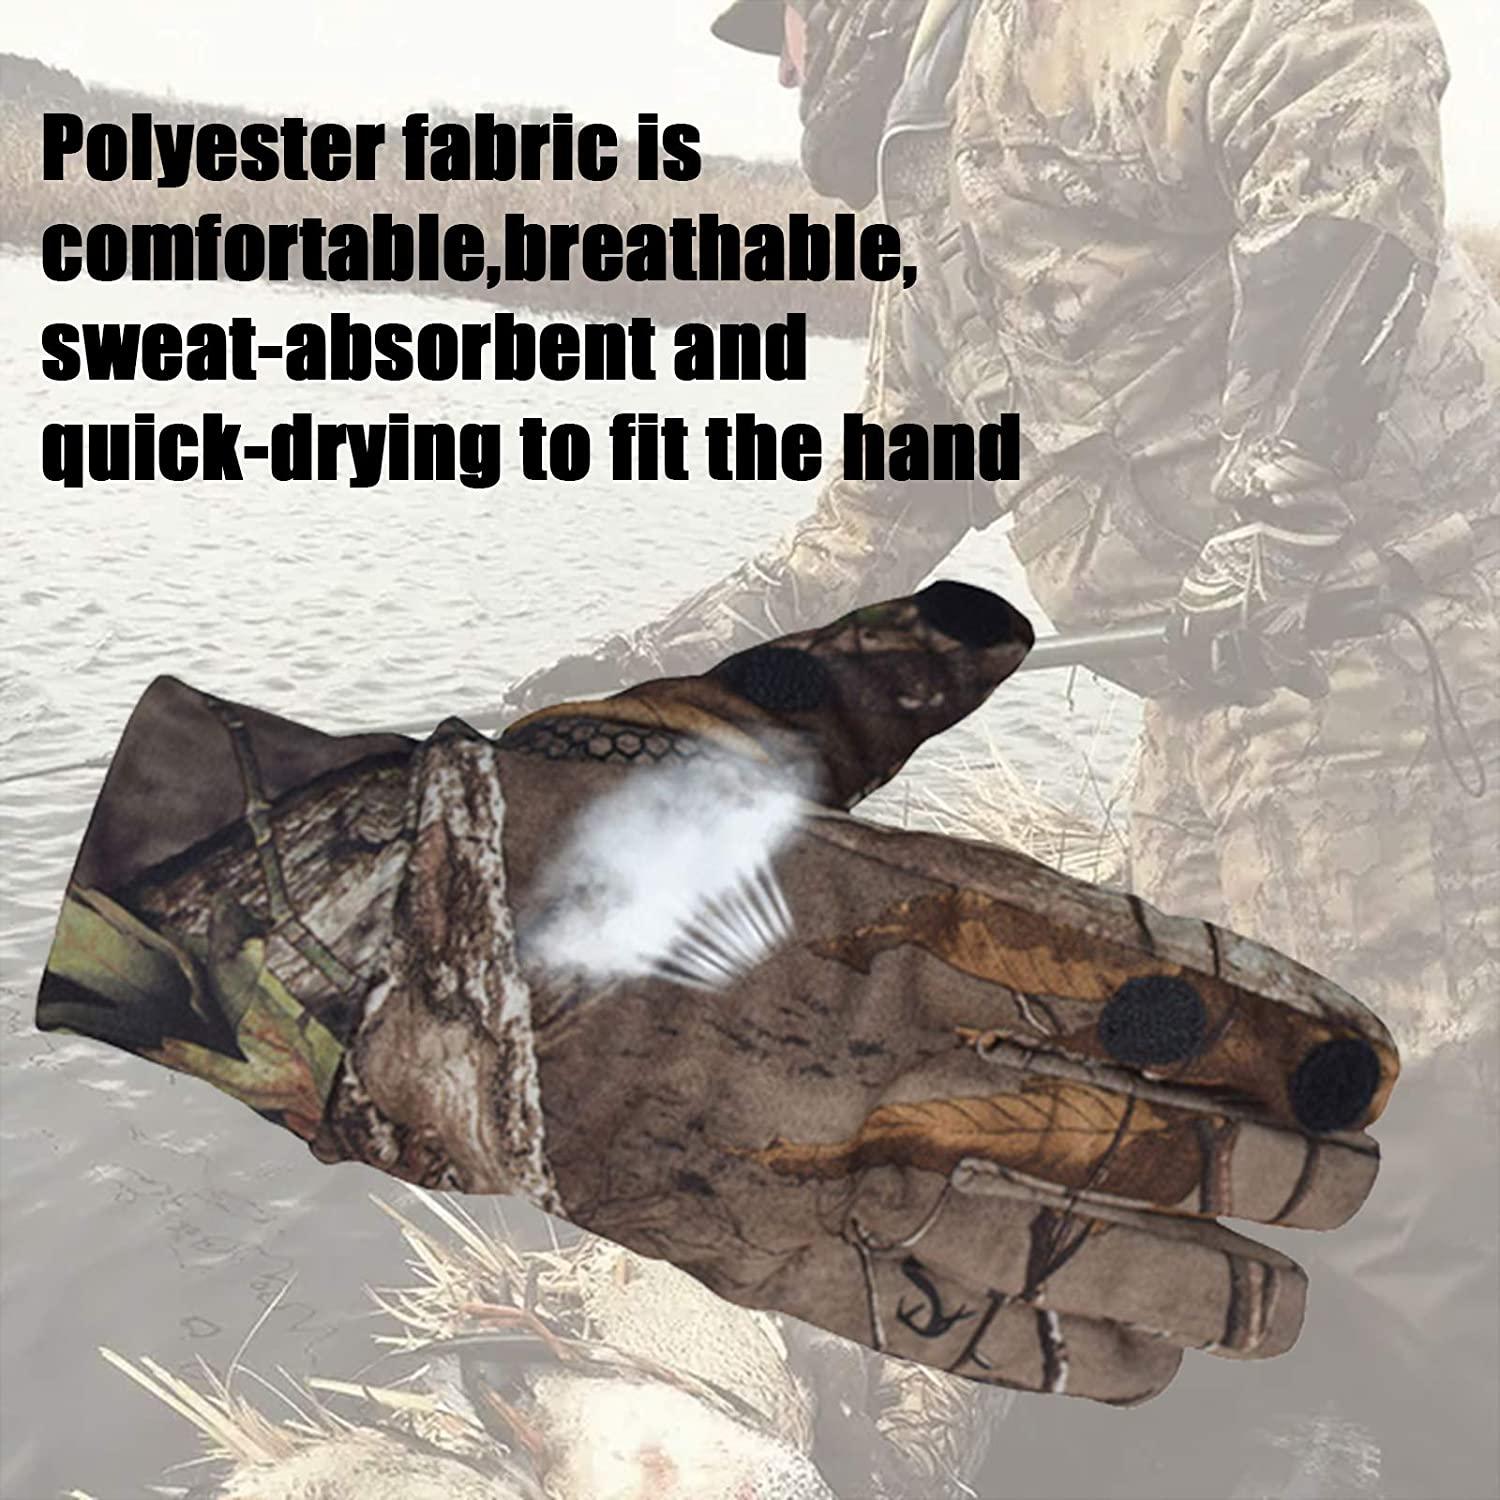 Mossy Oak Lightweight Camo Hunting Gloves, Camouflage Accessories -   Canada